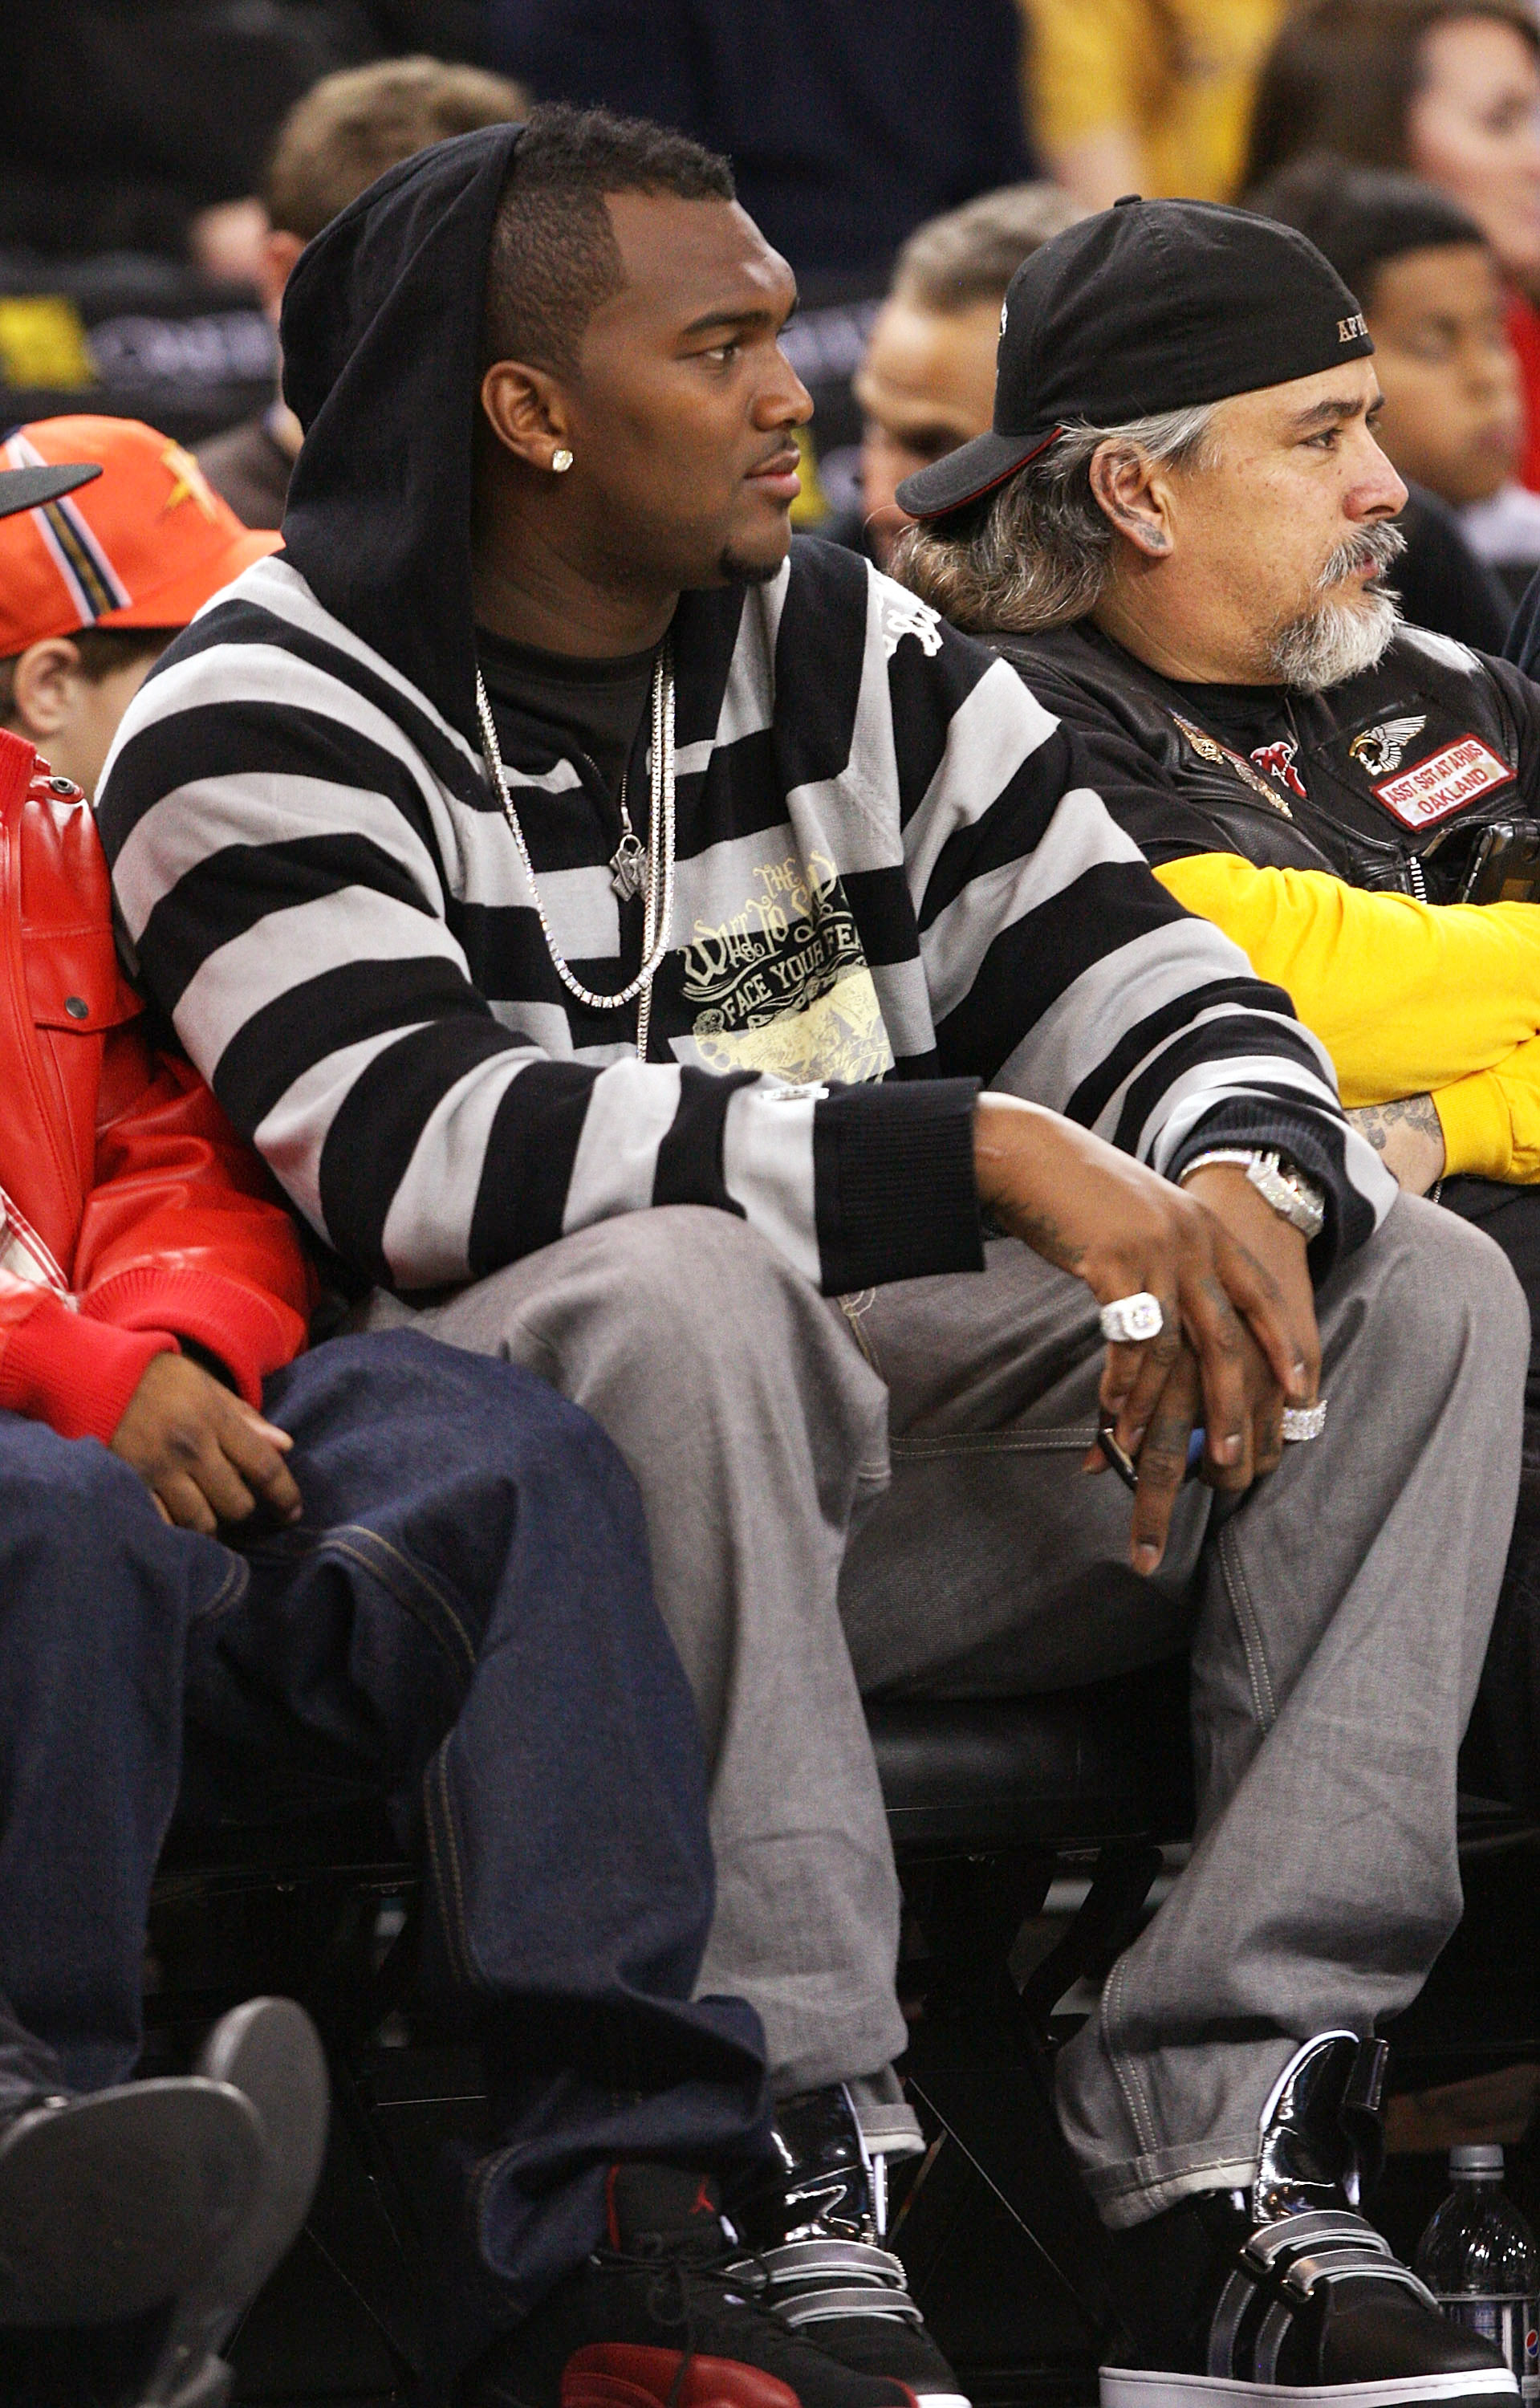 OAKLAND, CA - DECEMBER 28:  Quarterback of the Oakland Raider JaMarcus Russell looks on during the Boston Celtics and the Golden State Warriors NBA game at Oracle Arena on December 28, 2009 in Oakland, California. NOTE TO USER: User expressly acknowledges